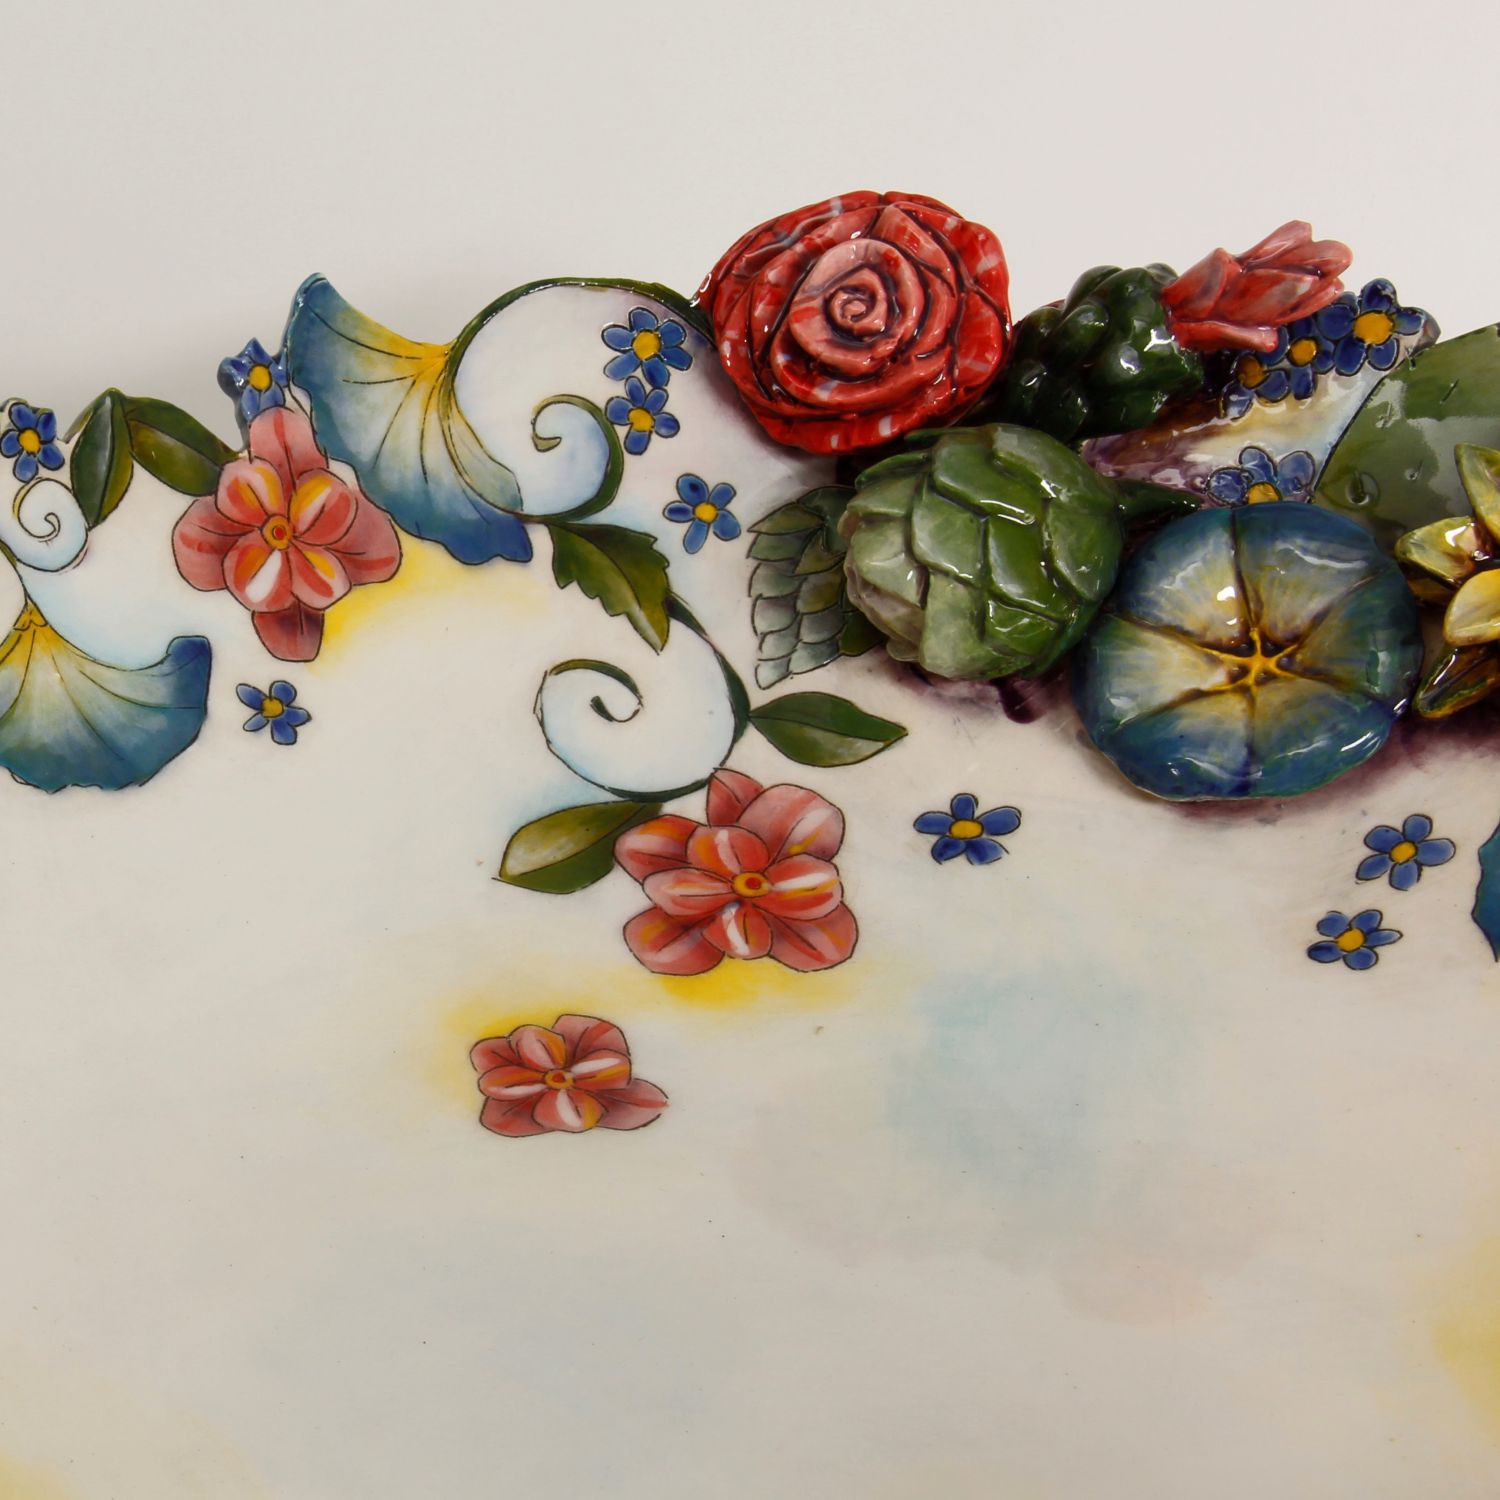 DaNisha Sculpture: Floral Bowl with Succulents Product Image 3 of 4